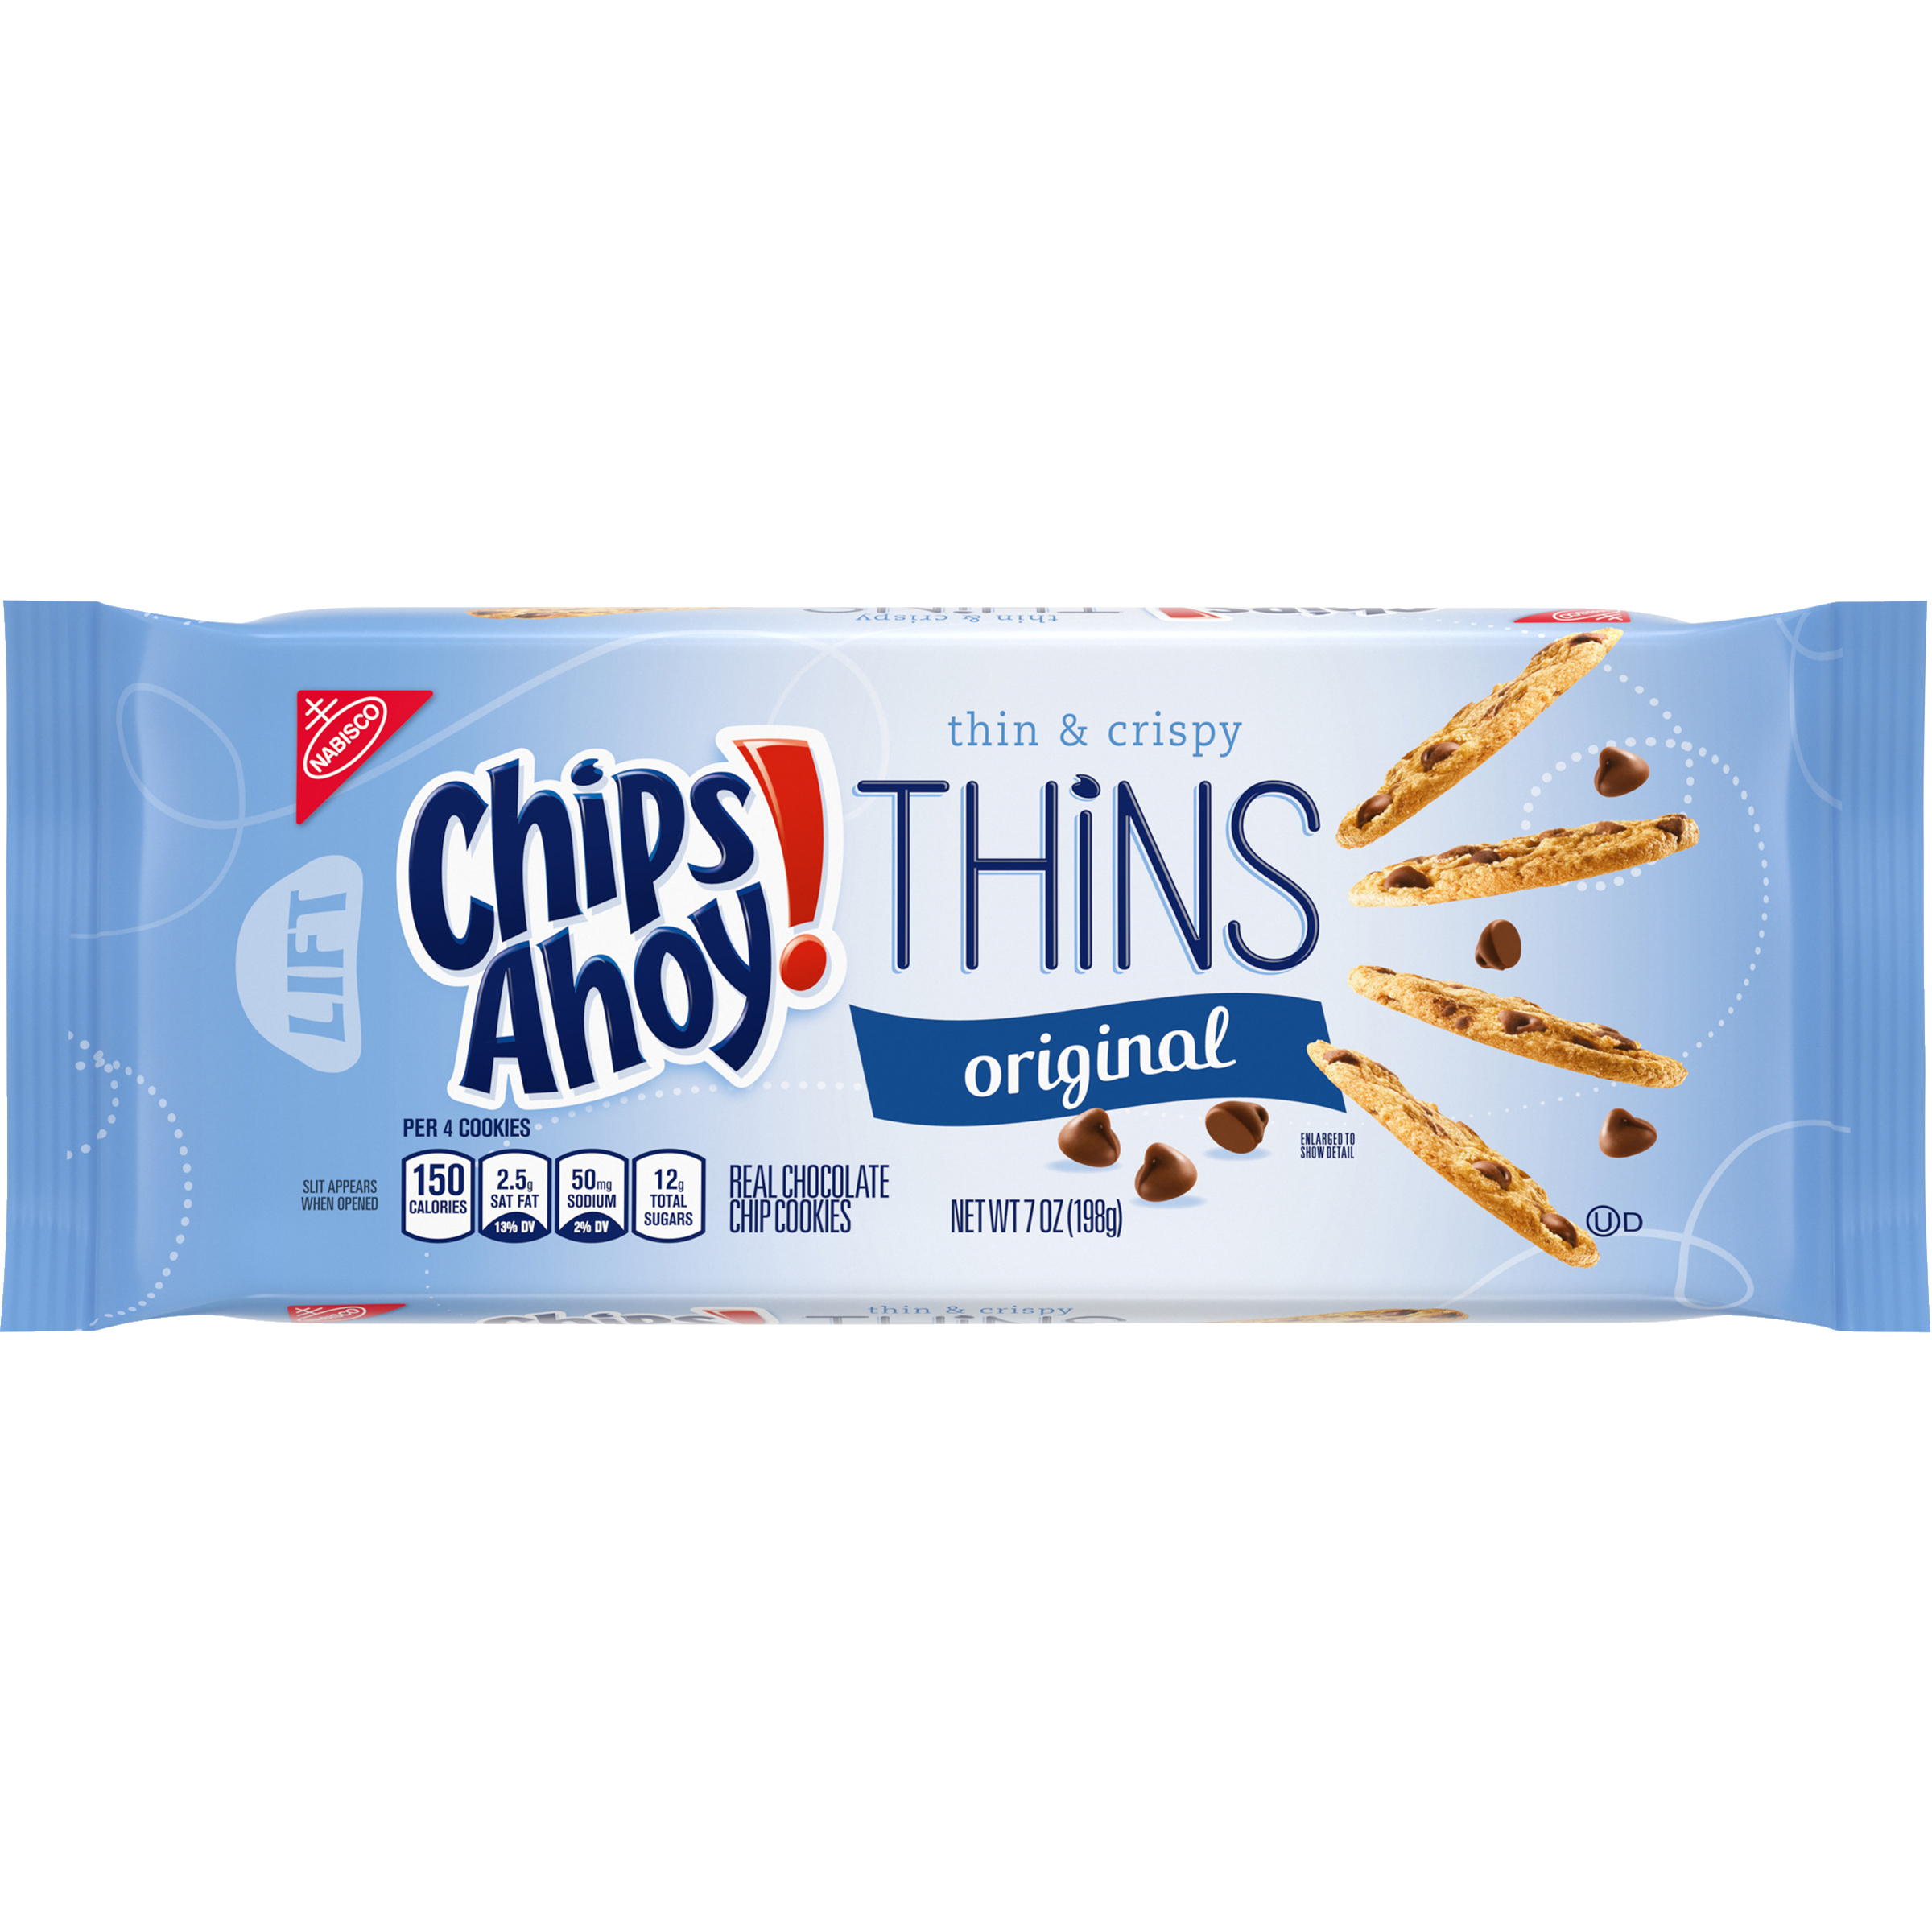 CHIPS AHOY! Thins Original Chocolate Chip Cookies, 7 oz-2